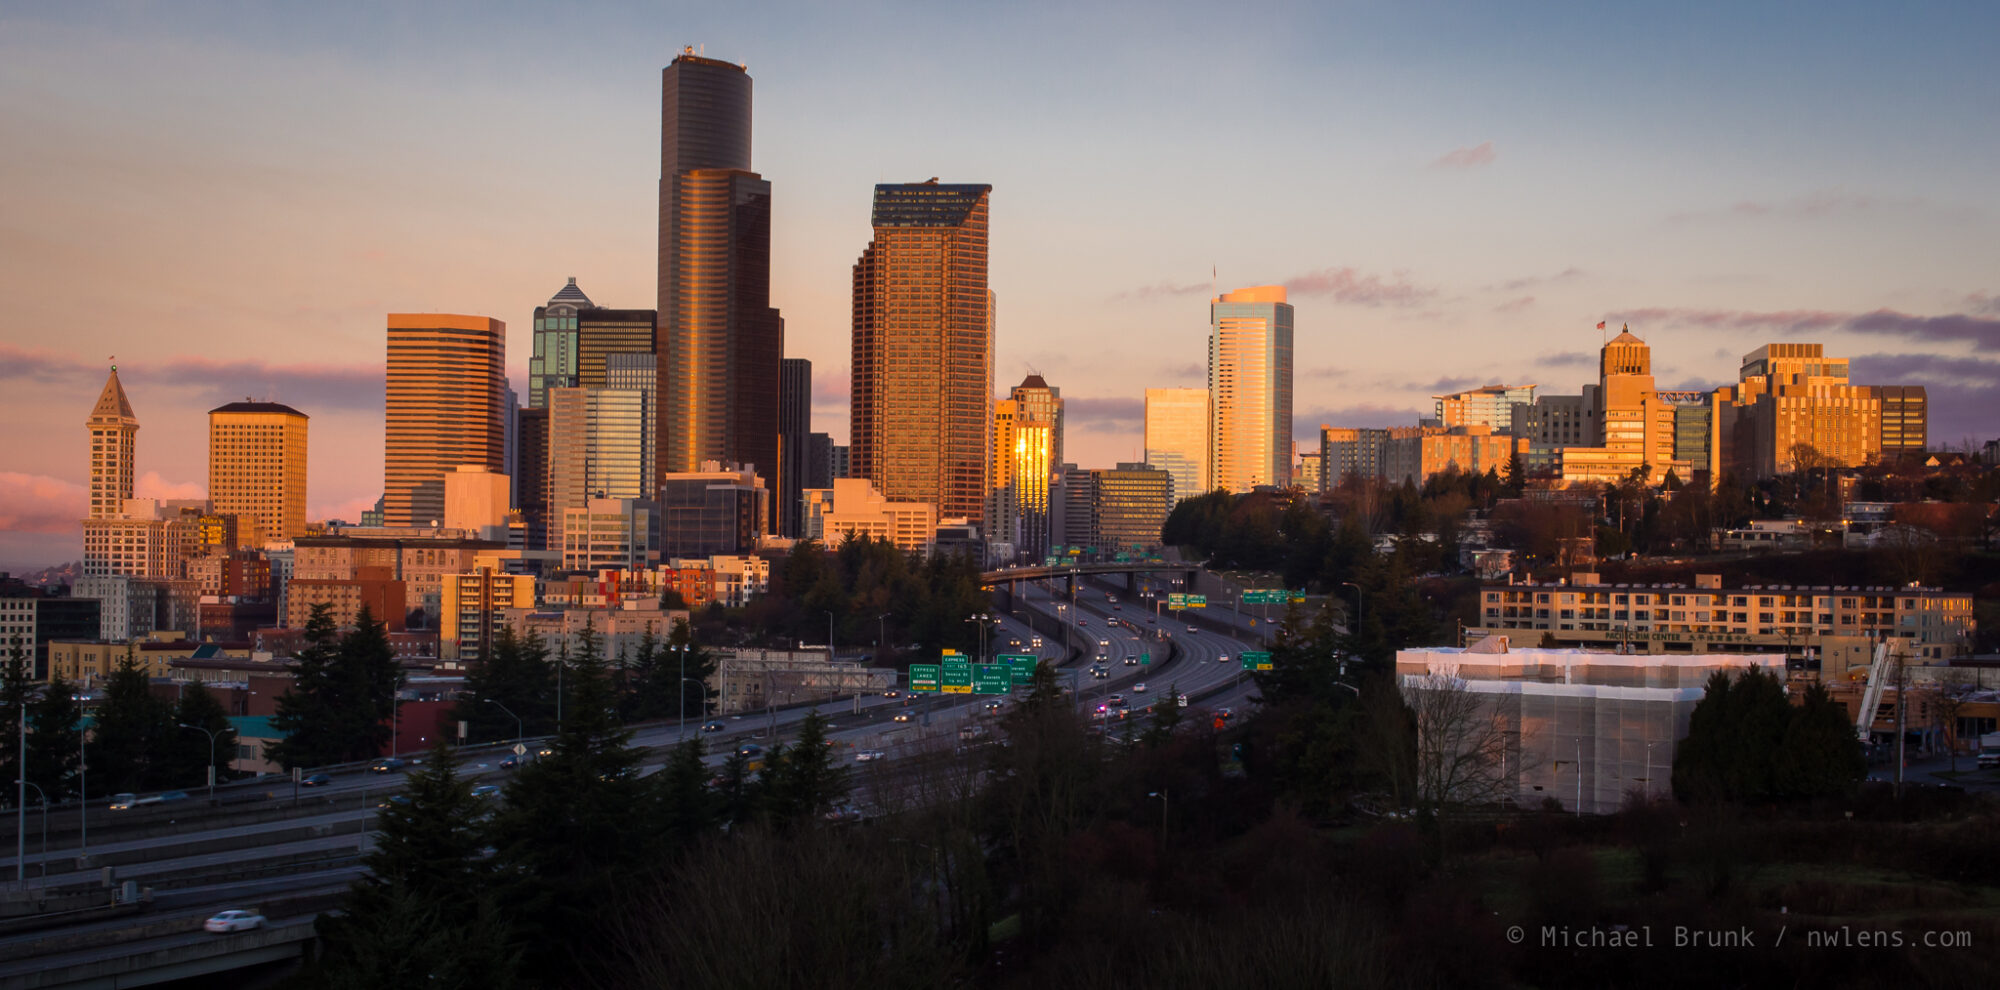 The Portland skyline viewed from the south, with light from the sunset reflecting off downtown buildings